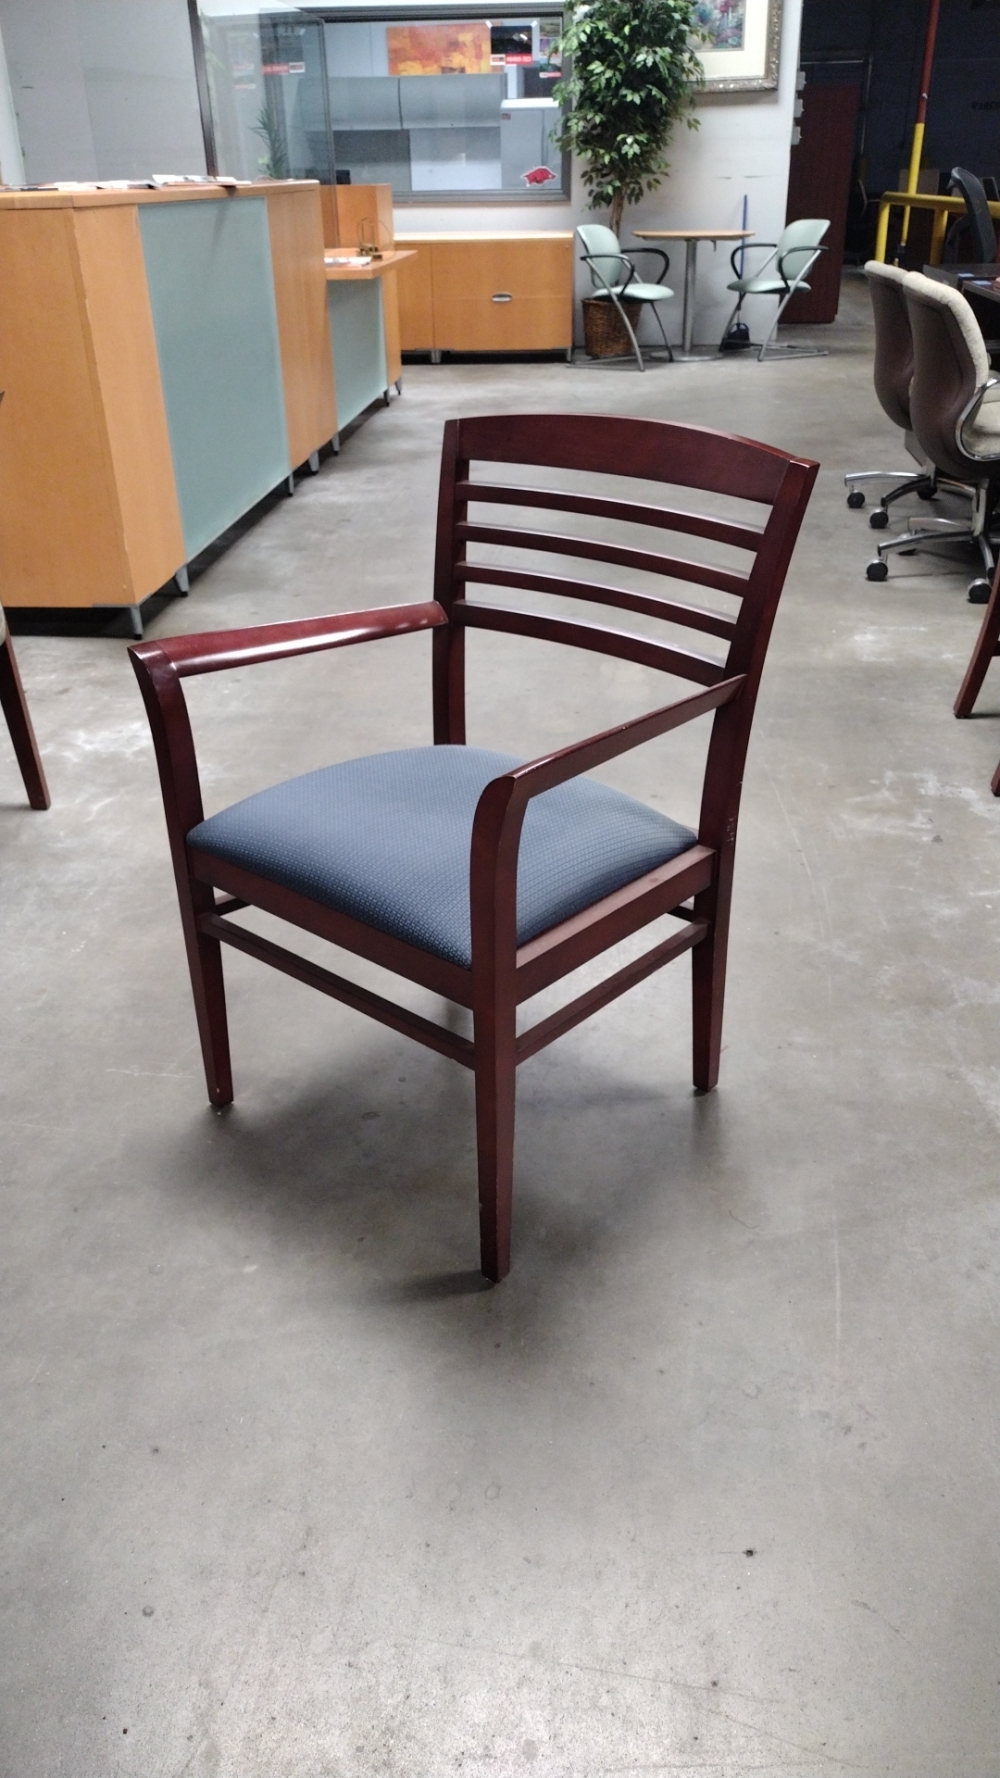  National Guest Chair